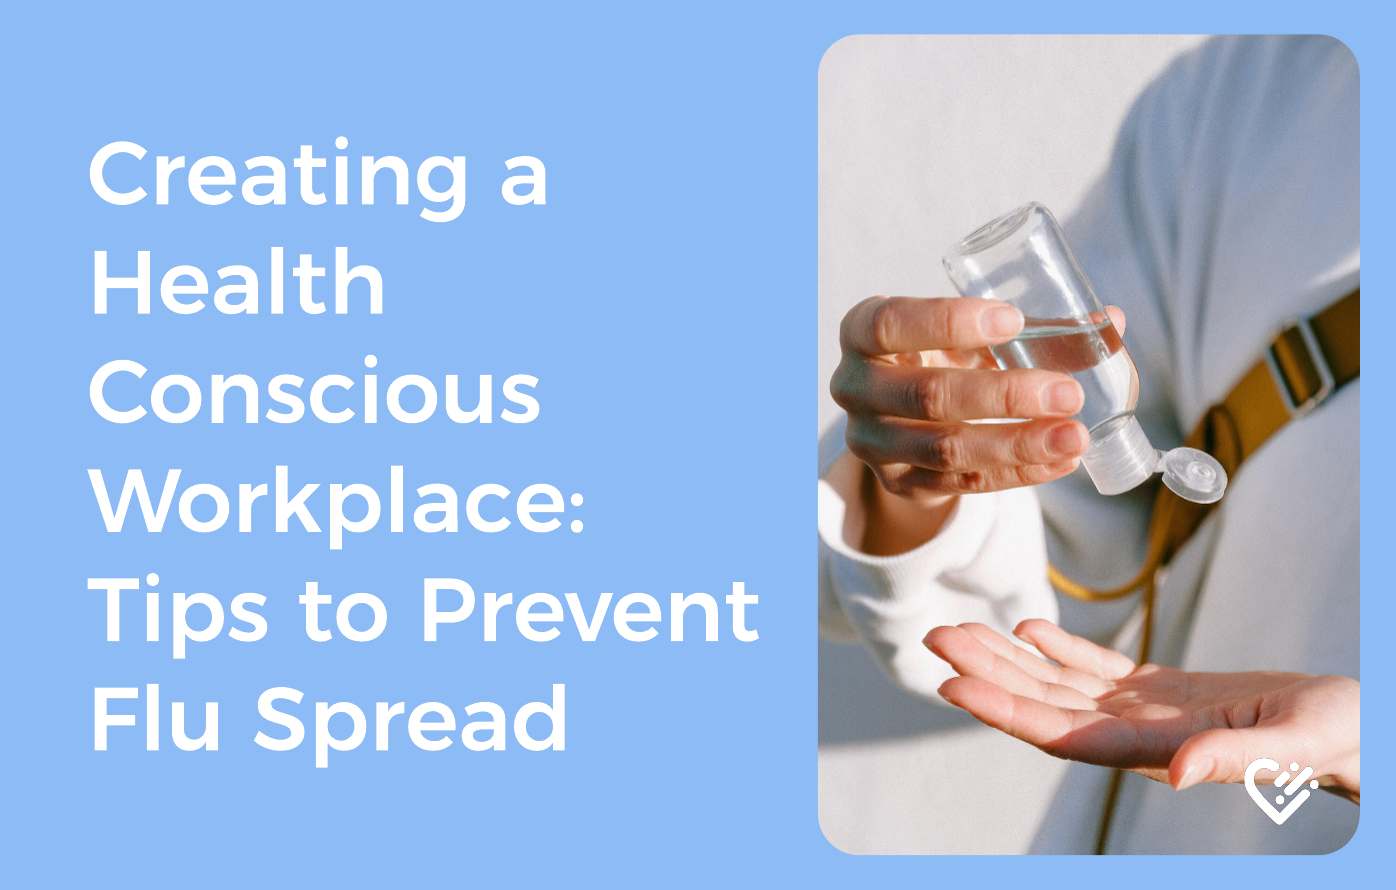 Creating a Health Conscious Workplace: Tips to Prevent Flu Spread